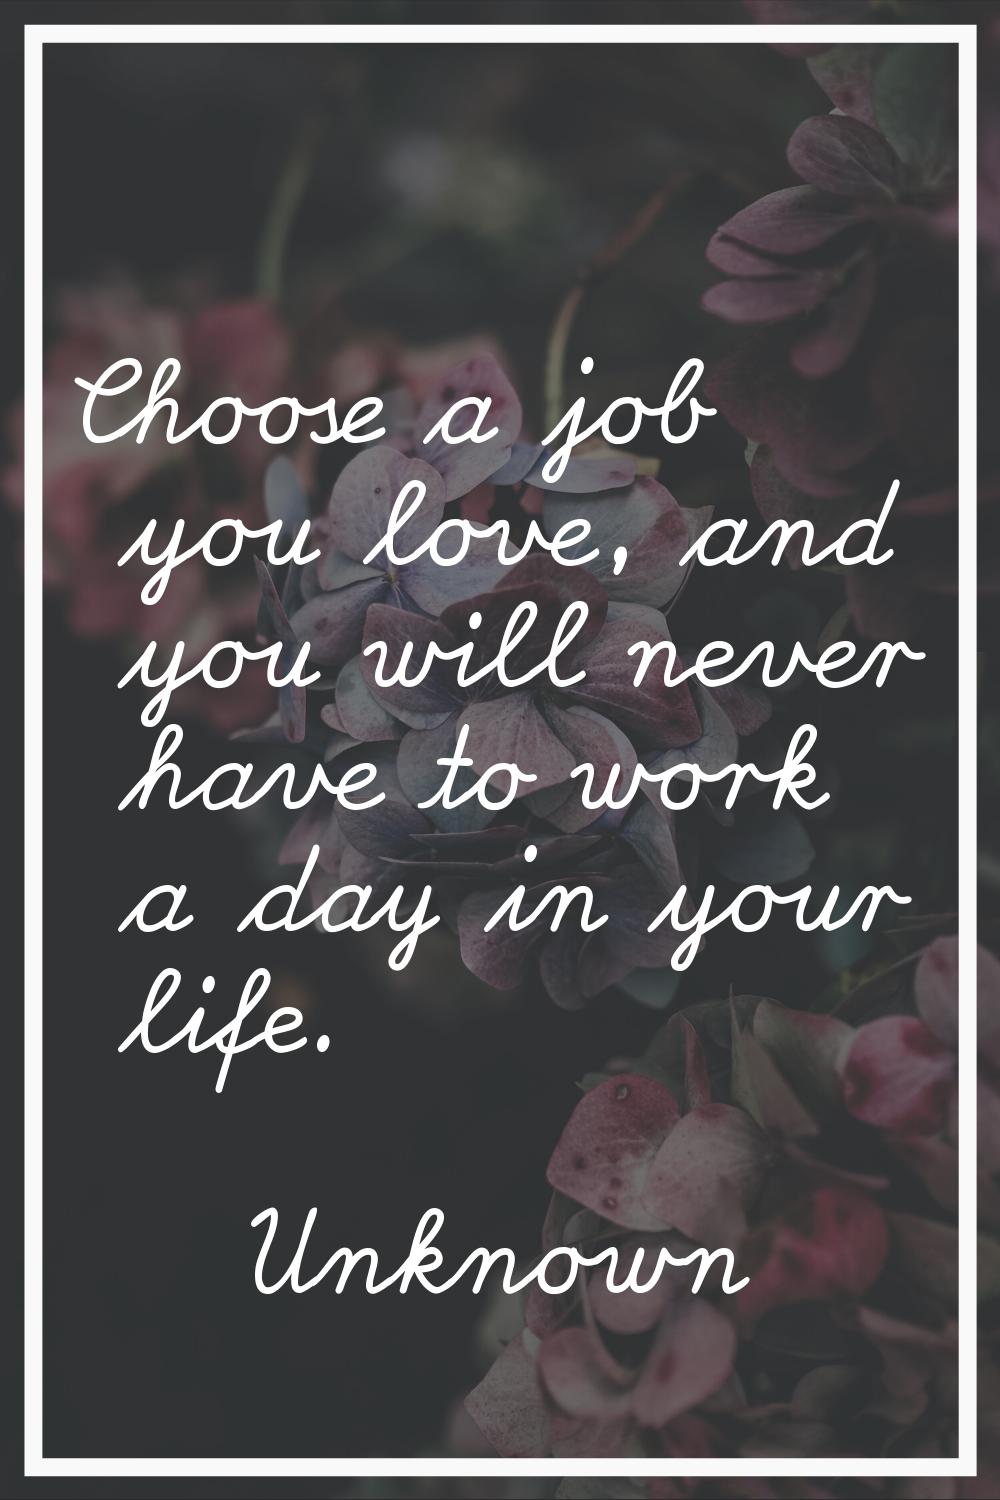 Choose a job you love, and you will never have to work a day in your life.